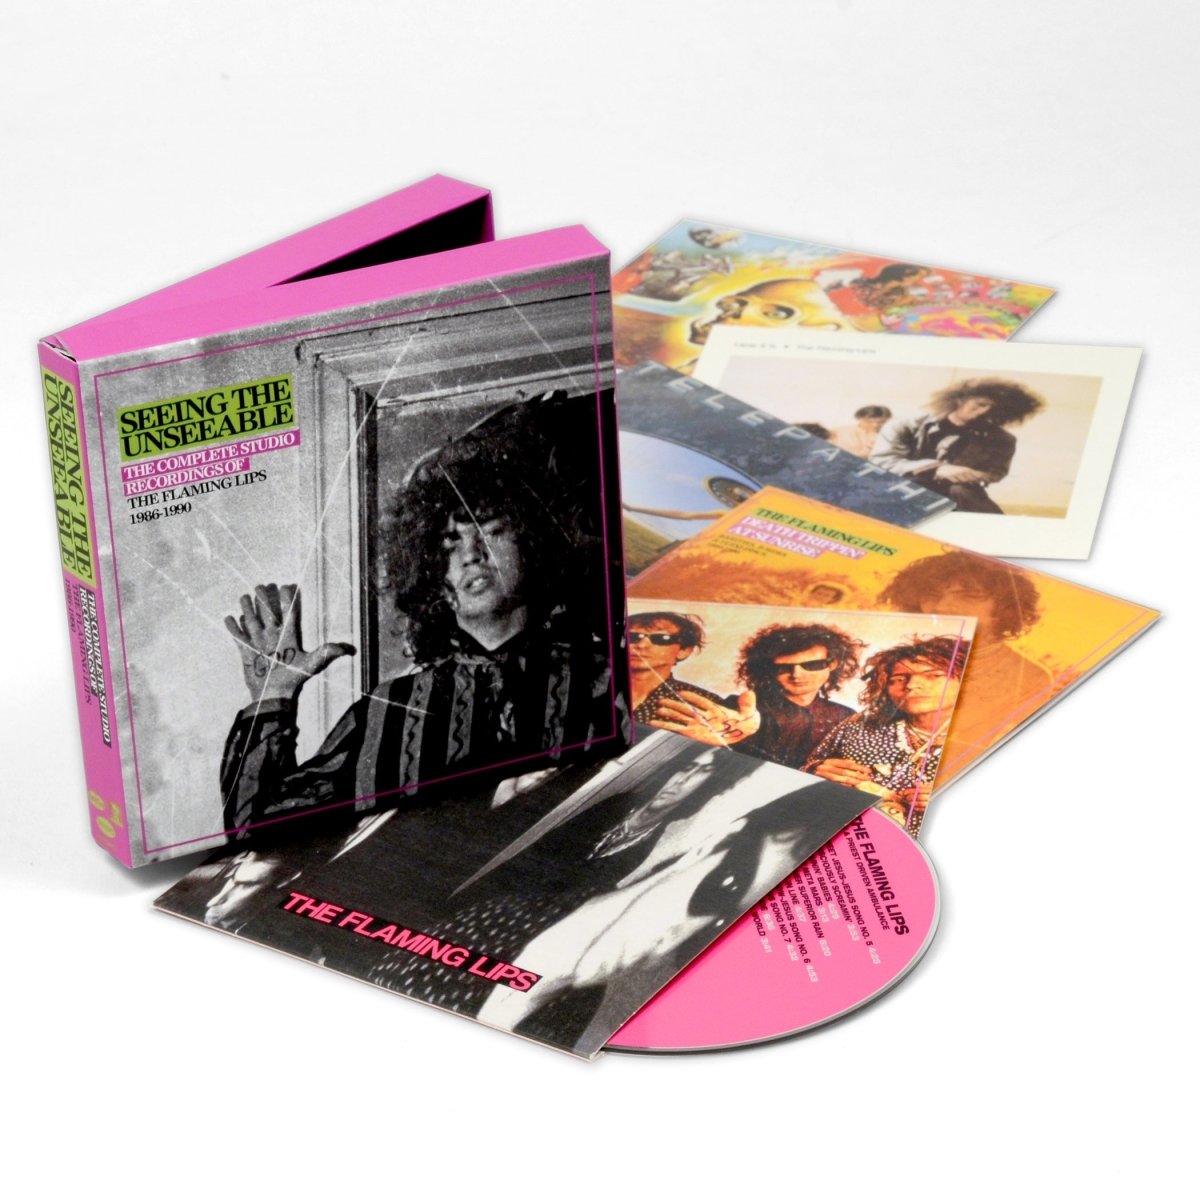 The Flaming Lips - Seeing The Unseeable: The Complete Studio Recordings Of The Flaming Lips 1986-1990 CD Box Set Vinyl